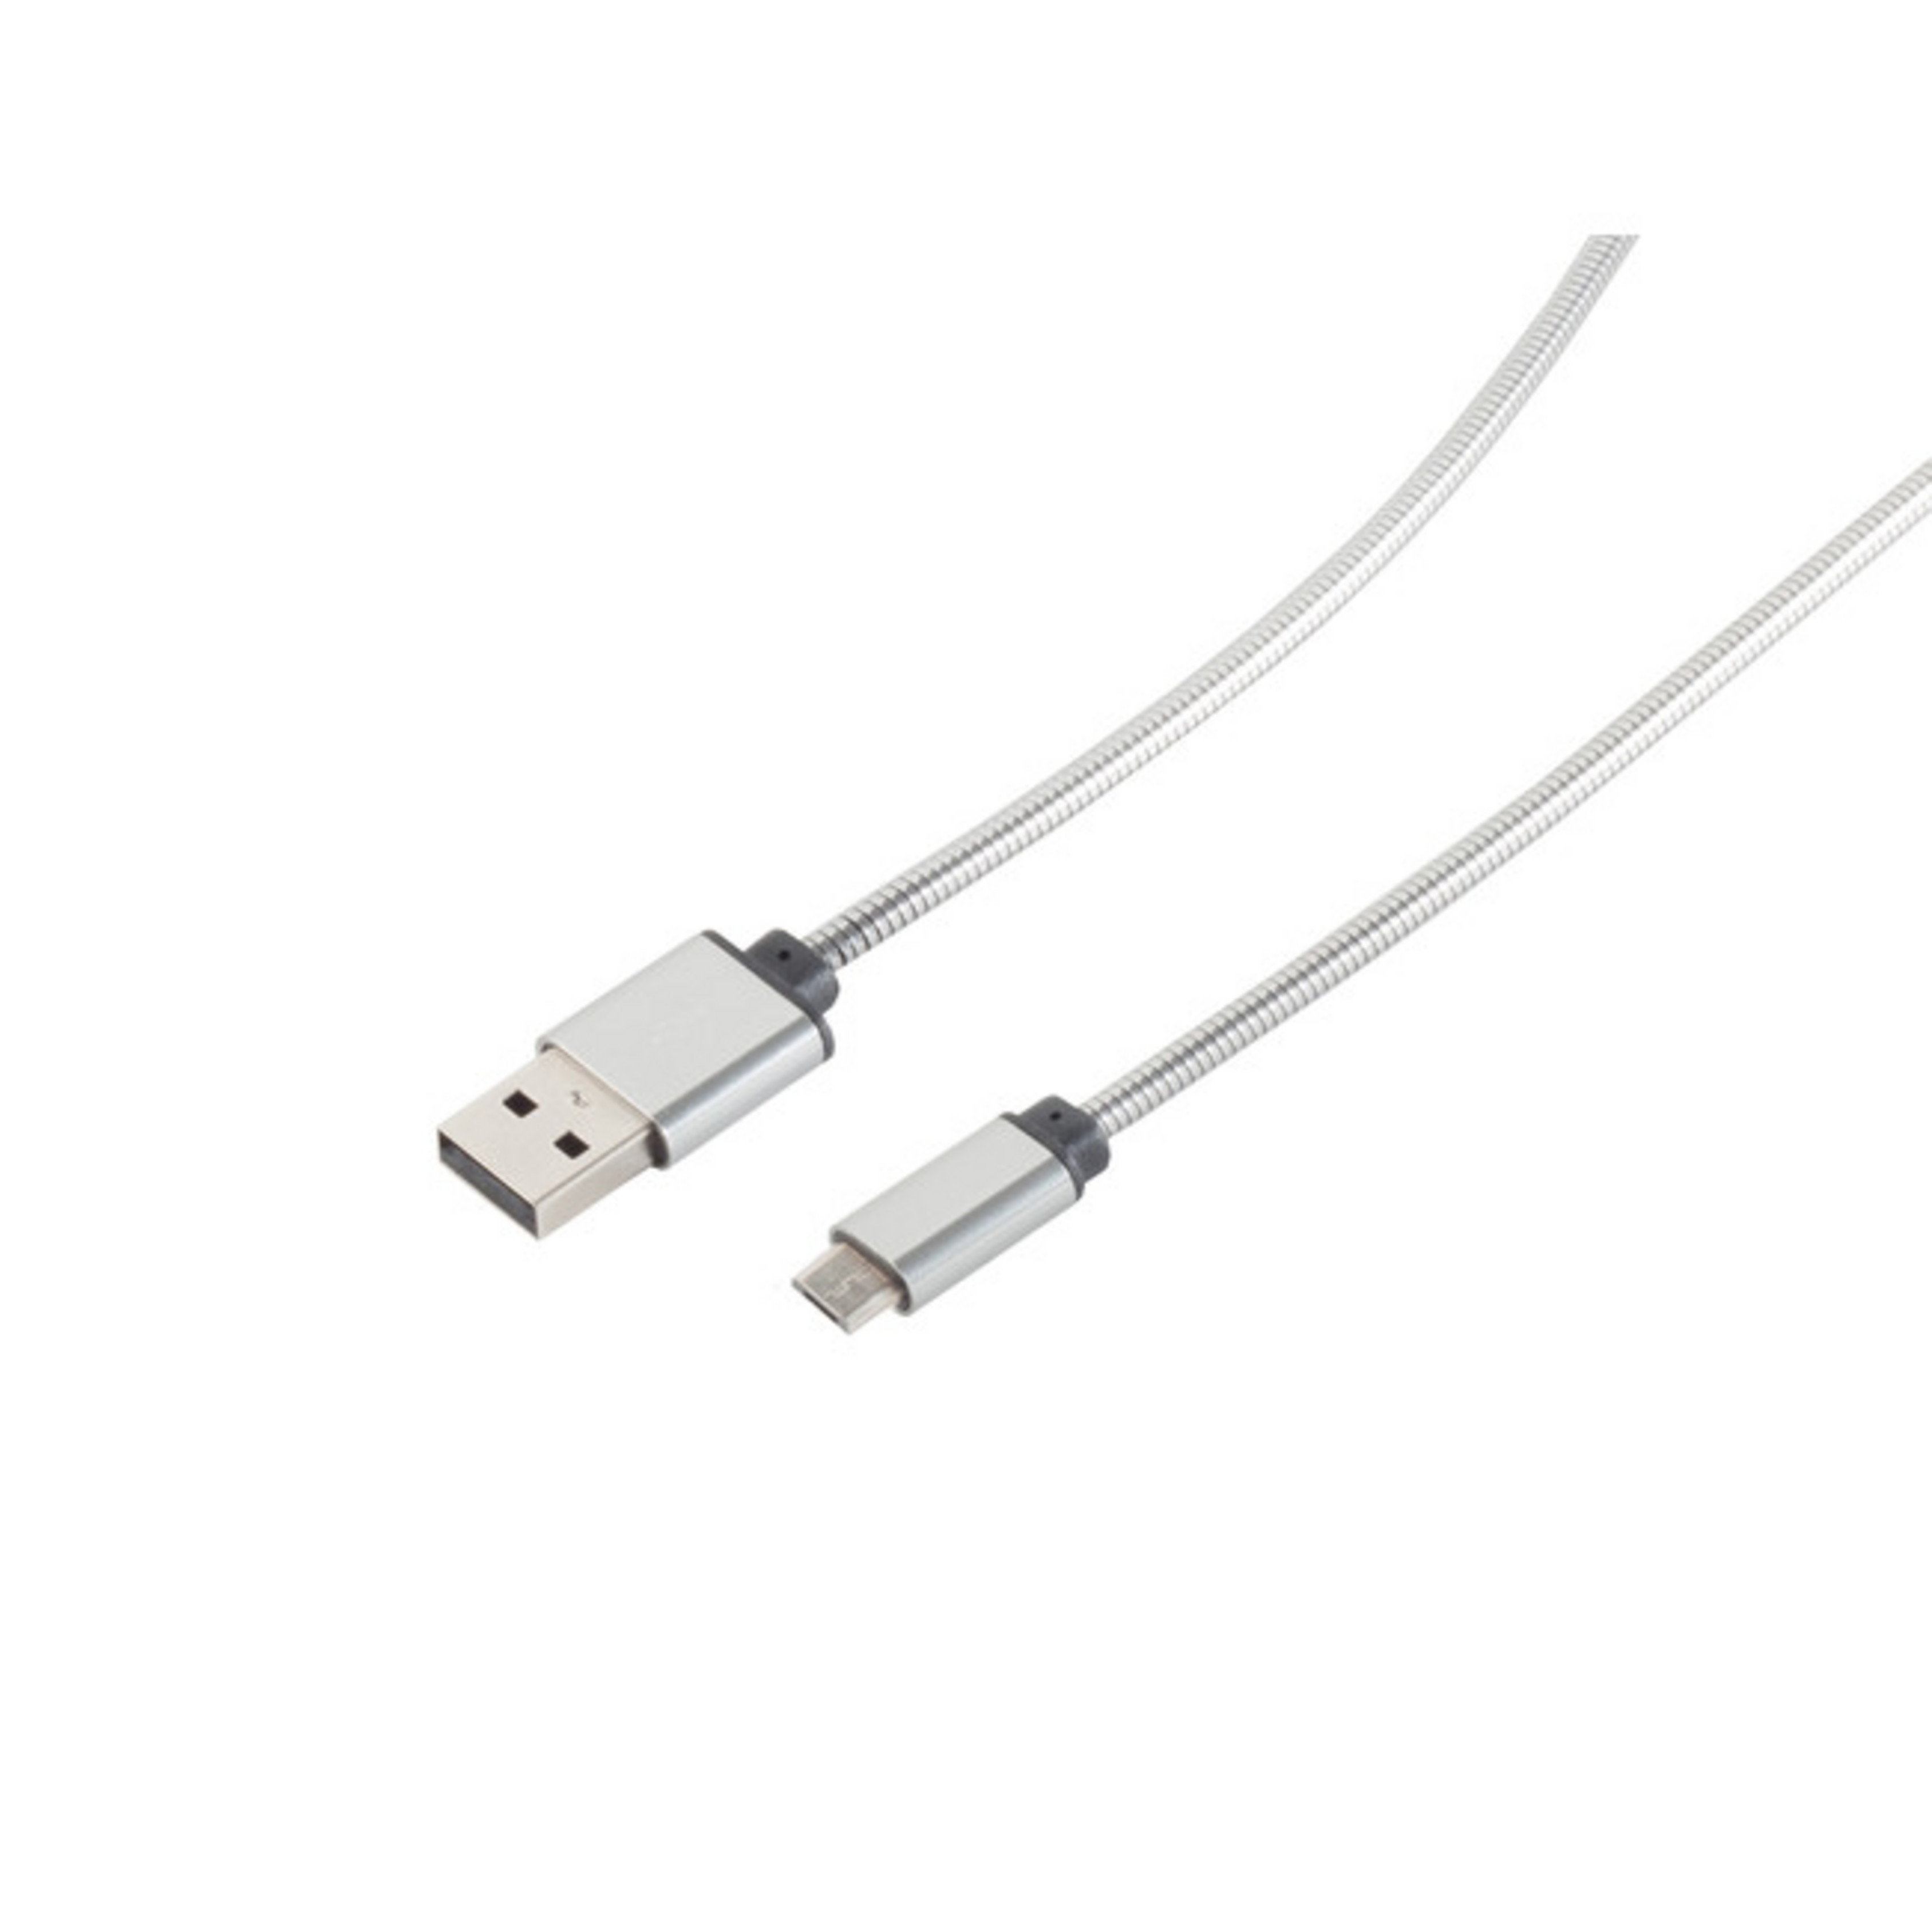 MAXIMUM Steel Lade-Sync USB S/CONN USB Kabel micro, USB Silber Kabel CONNECTIVITY A/ 1m